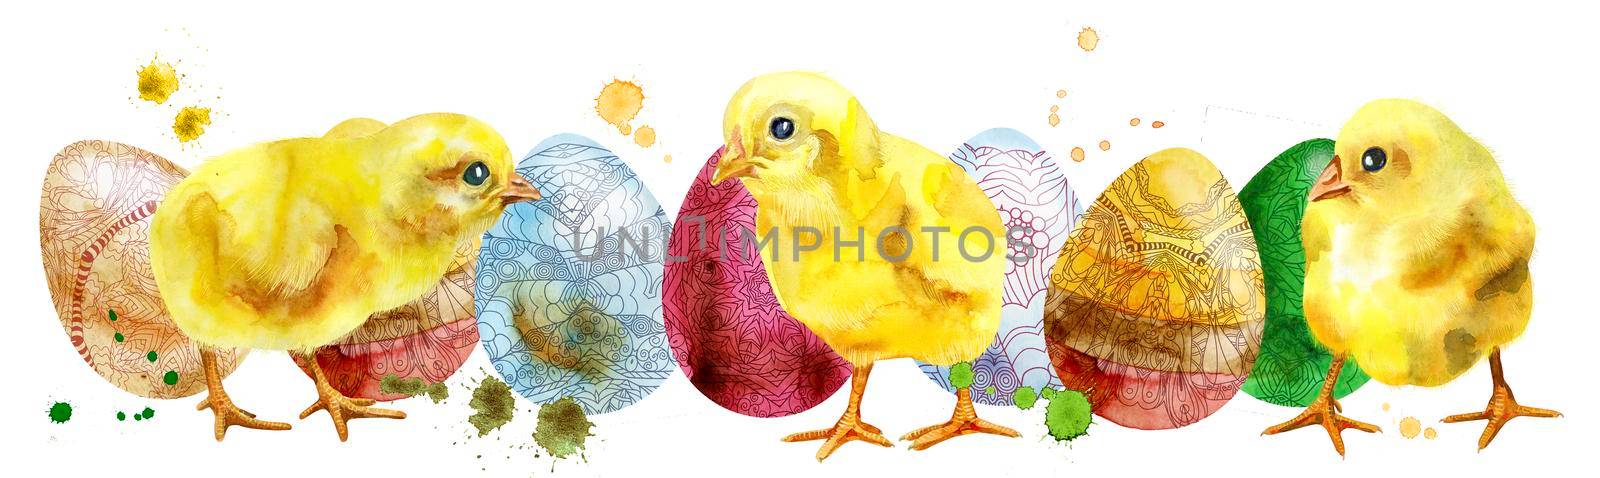 Watercolor Easter colored eggs and chickens. by NataOmsk